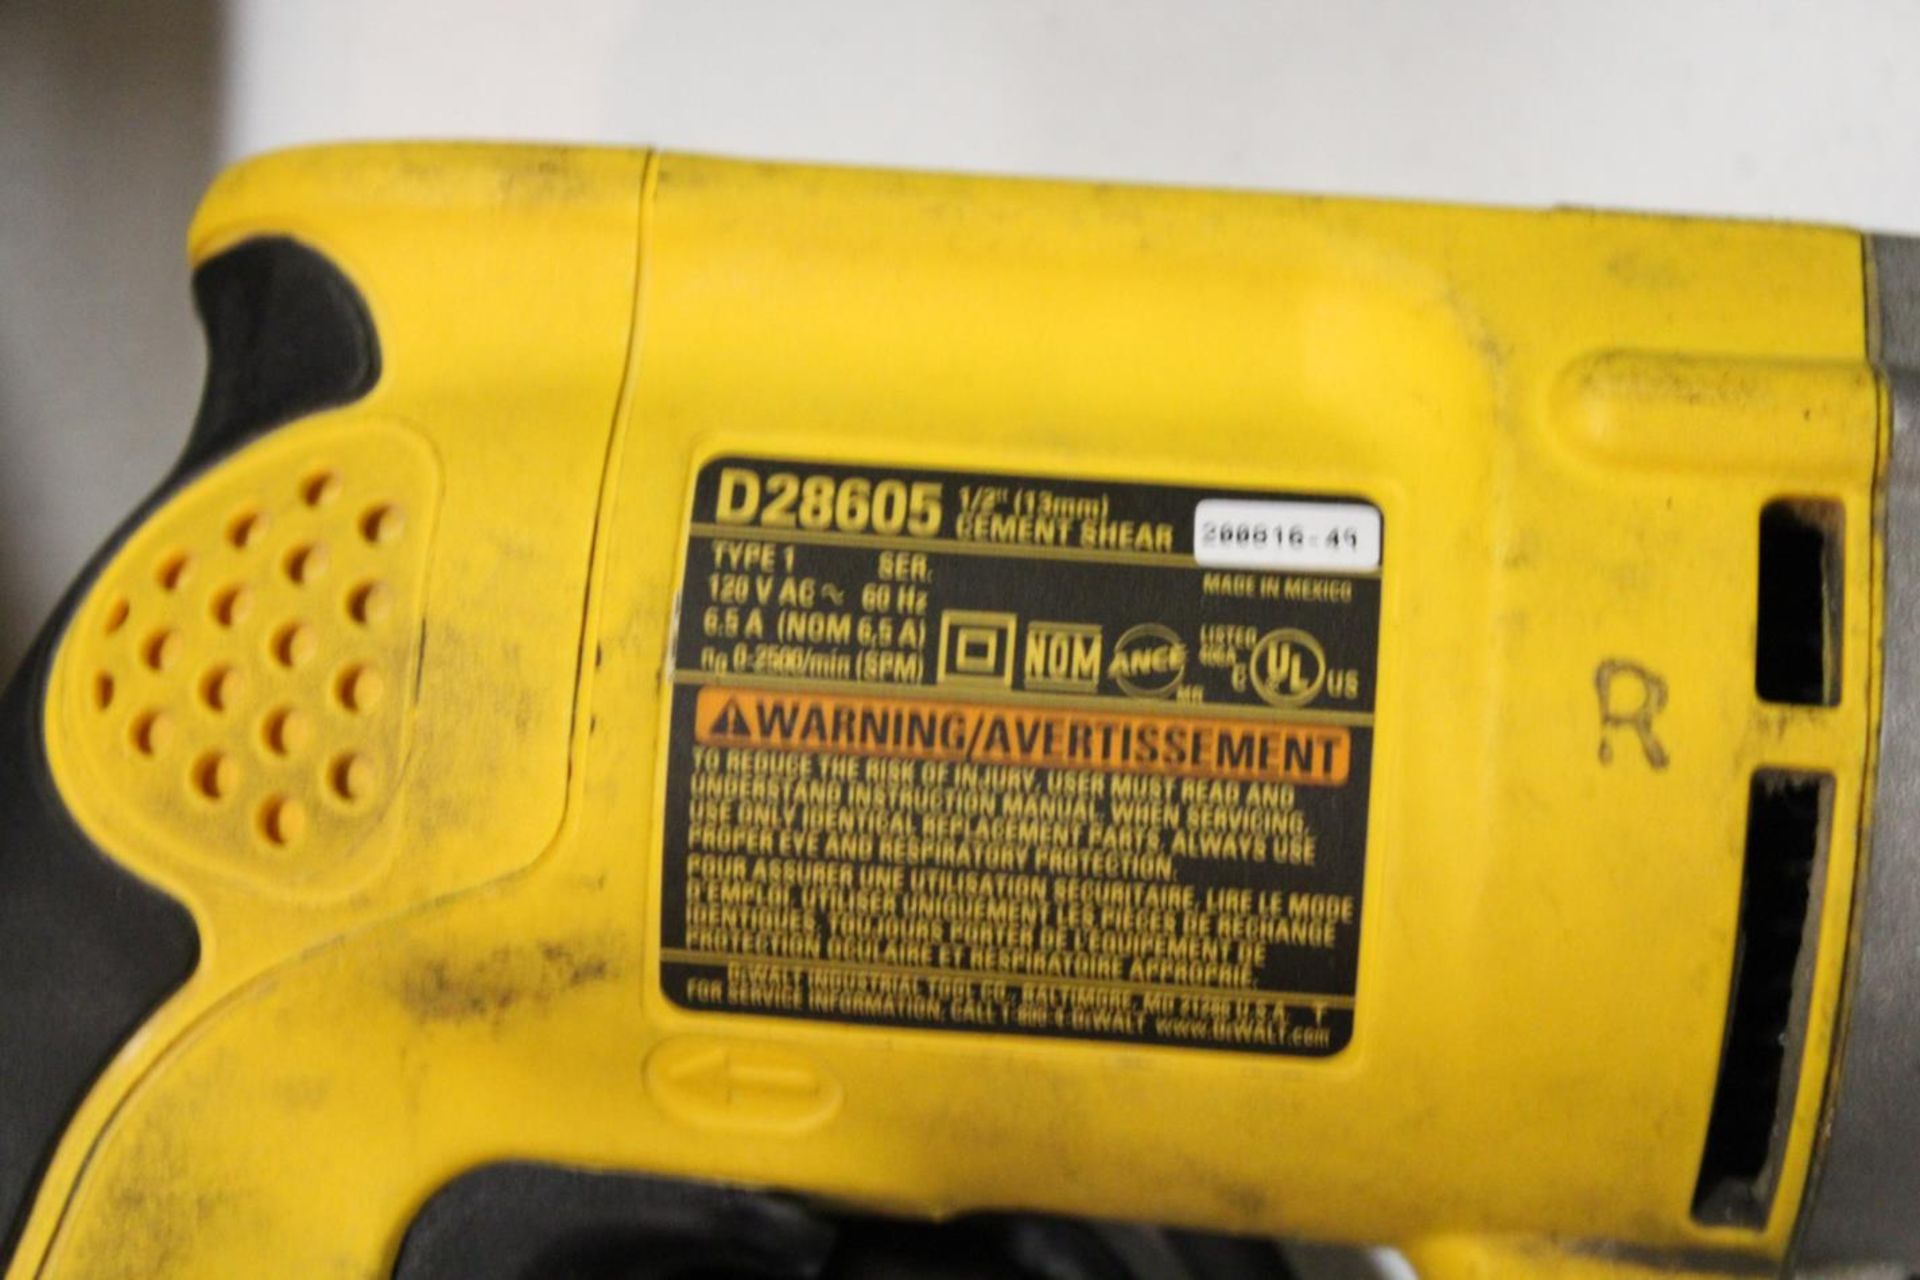 DeWalt Drill with Shear Attachment - Image 4 of 4